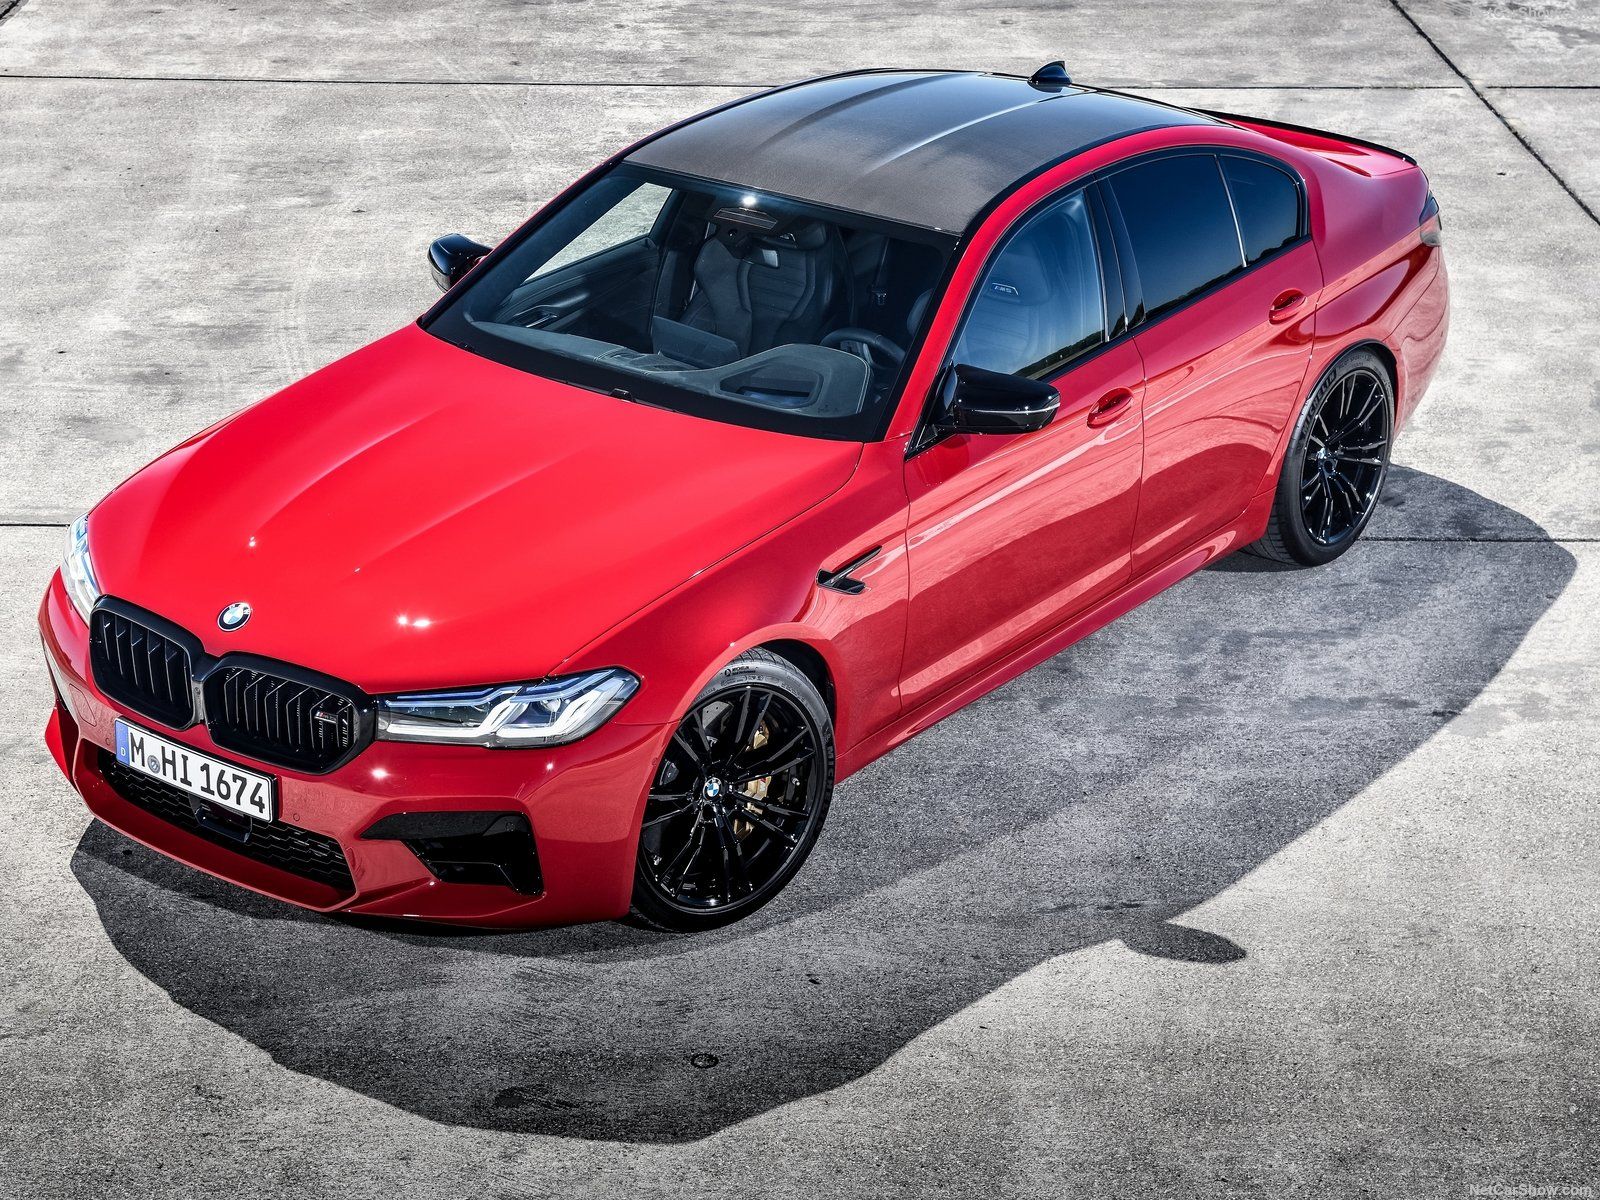 Бмв м5 competition. BMW m5 f90 Competition. BMW m5 Competition 2021. BMW m5 f90 Competition CS. BMW m5 f90 CS 2020.